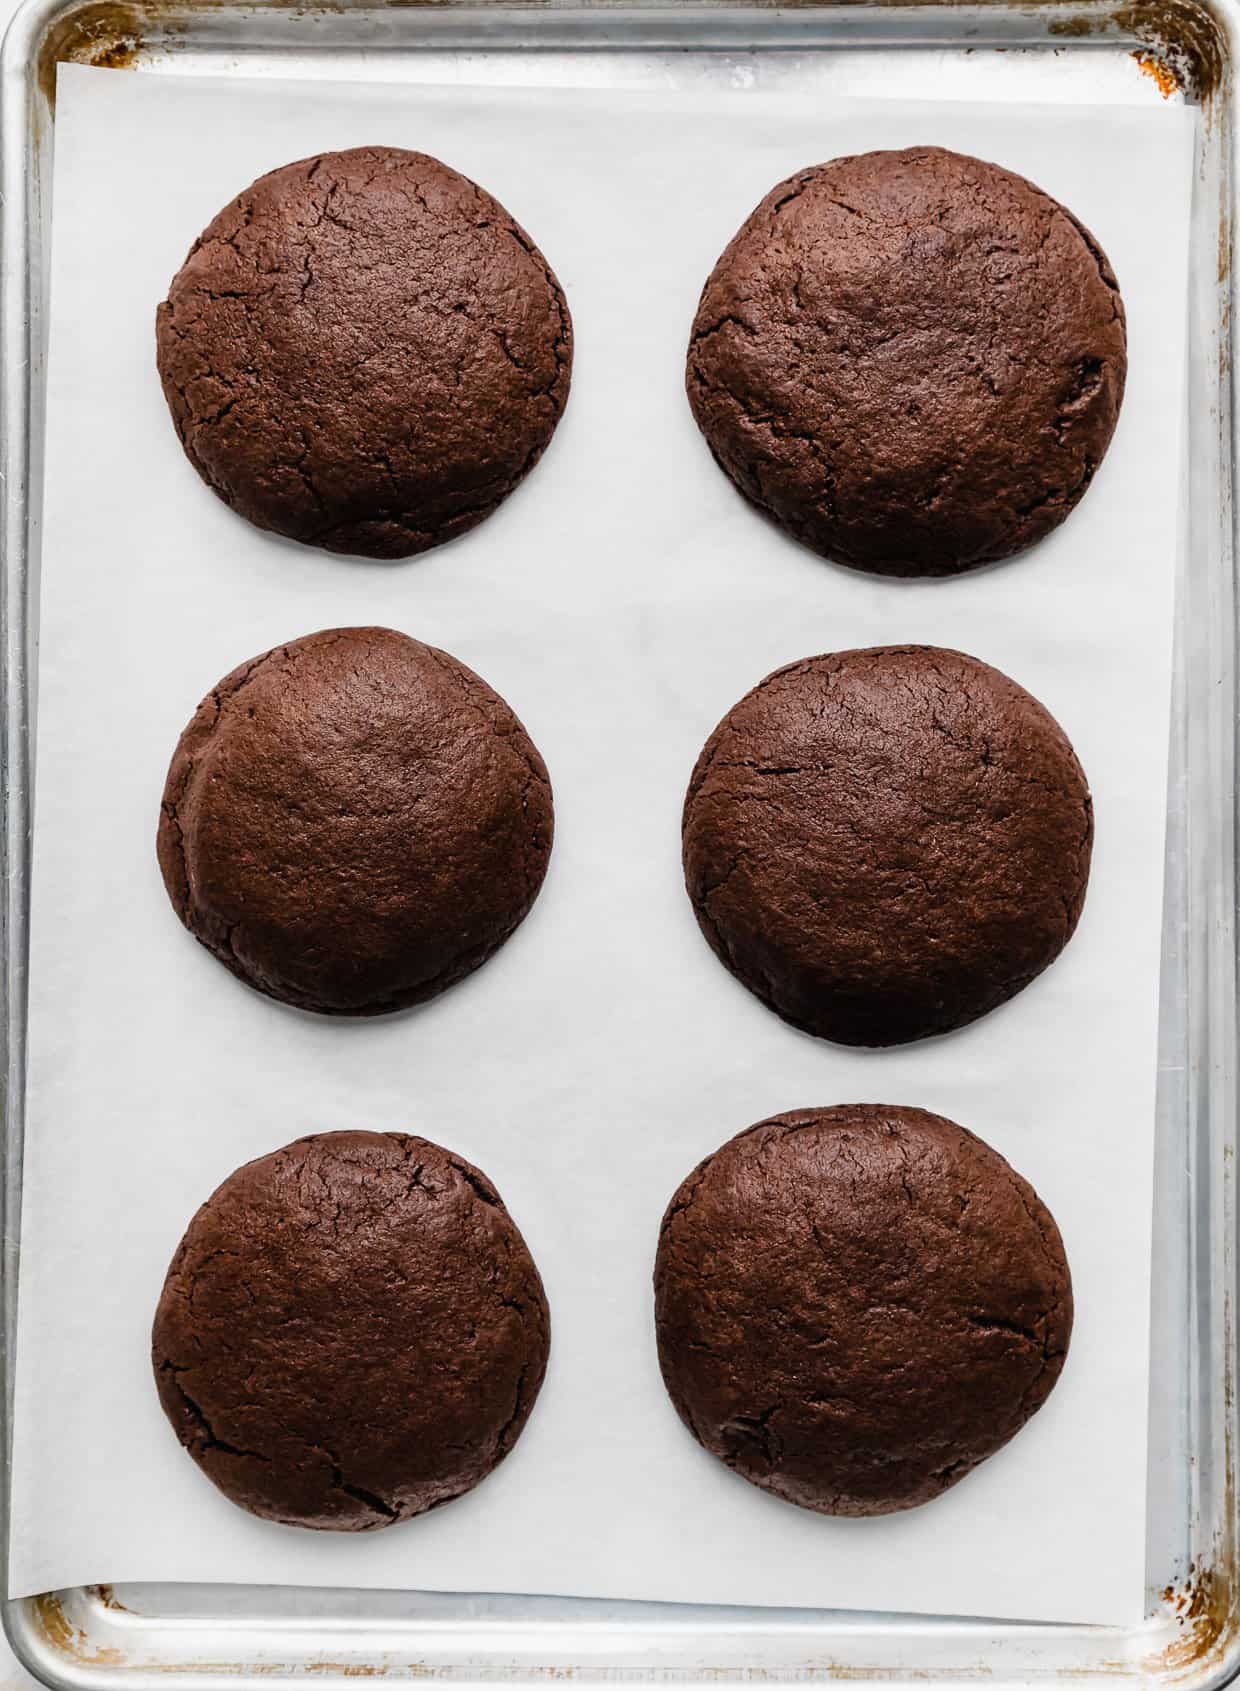 Six baked brownie cookies on a white parchment paper.